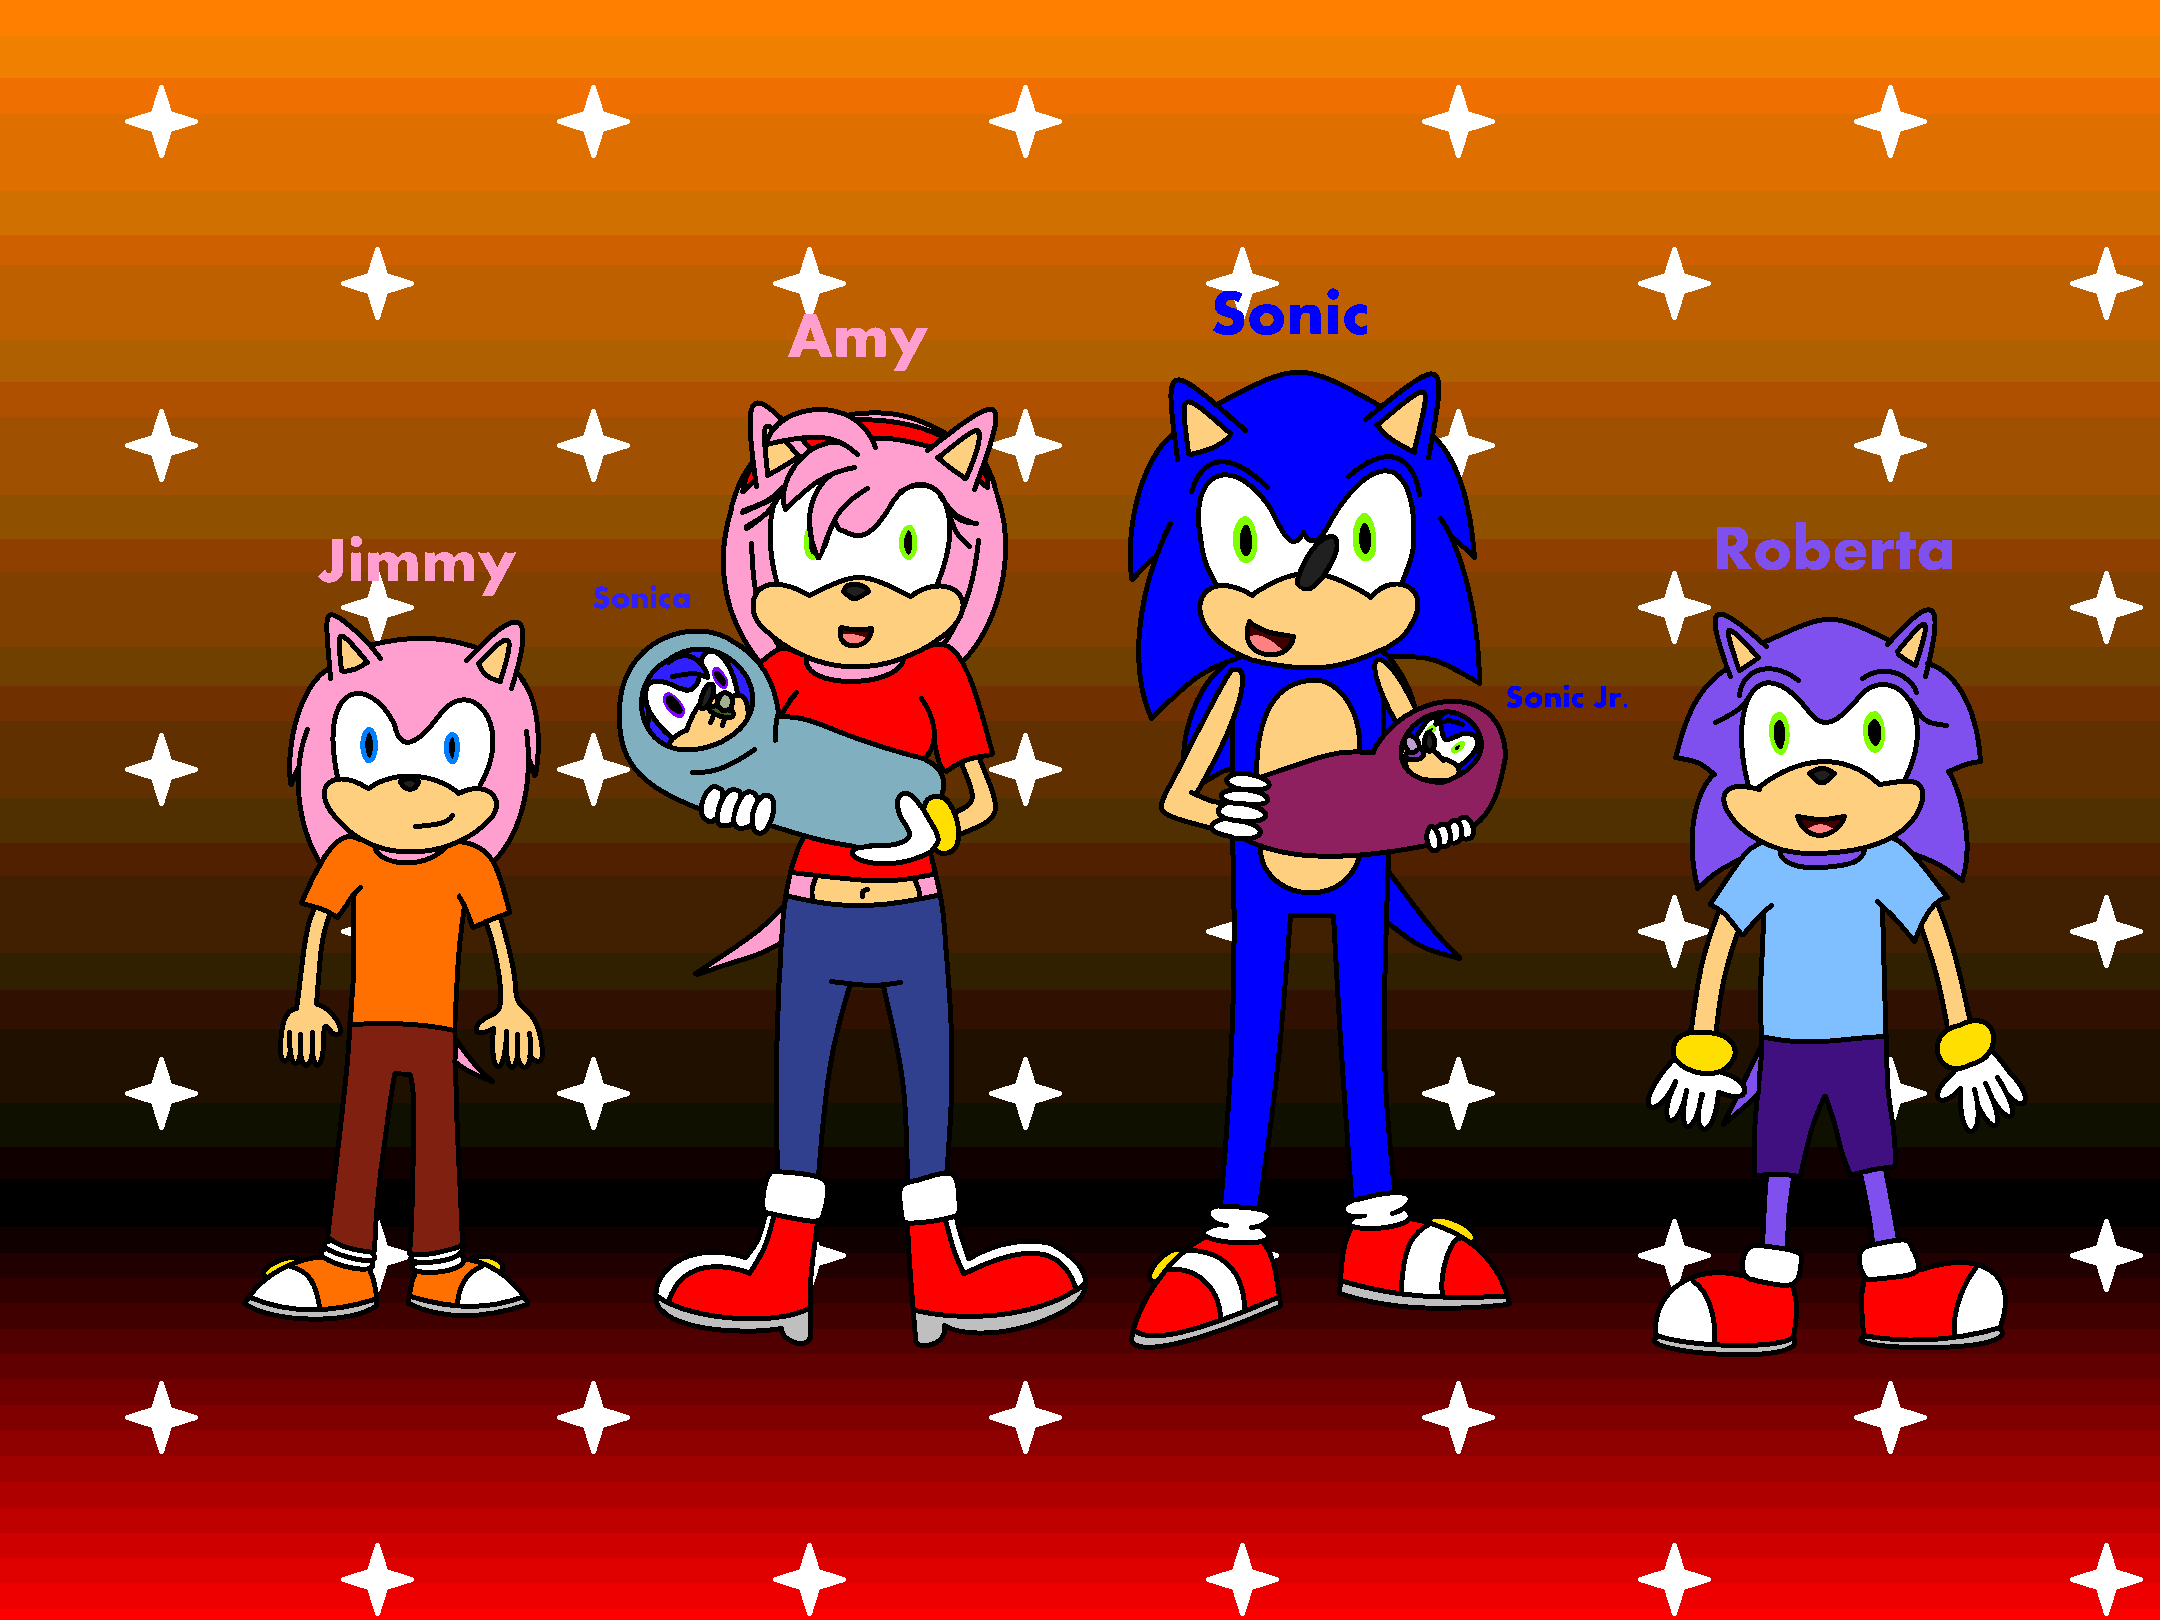 Sonic and Amy's future family by NintendoHedgehog on DeviantArt. sourc...